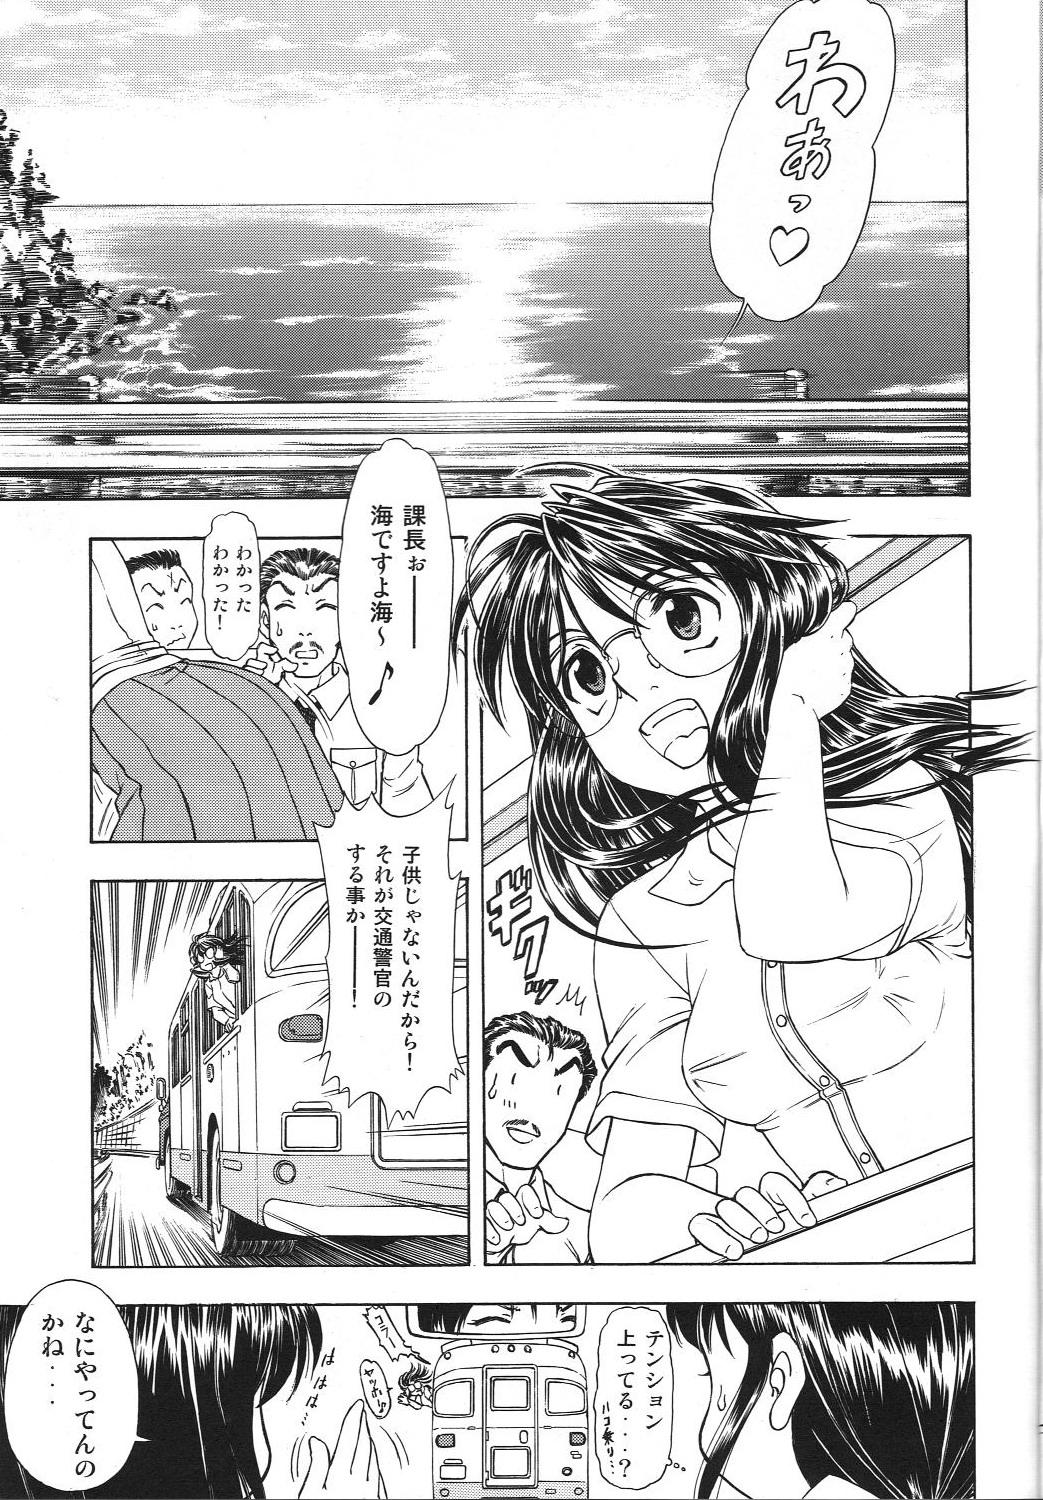 Teen Sex TAIHO++ file02 - Youre under arrest Lesbiansex - Page 4